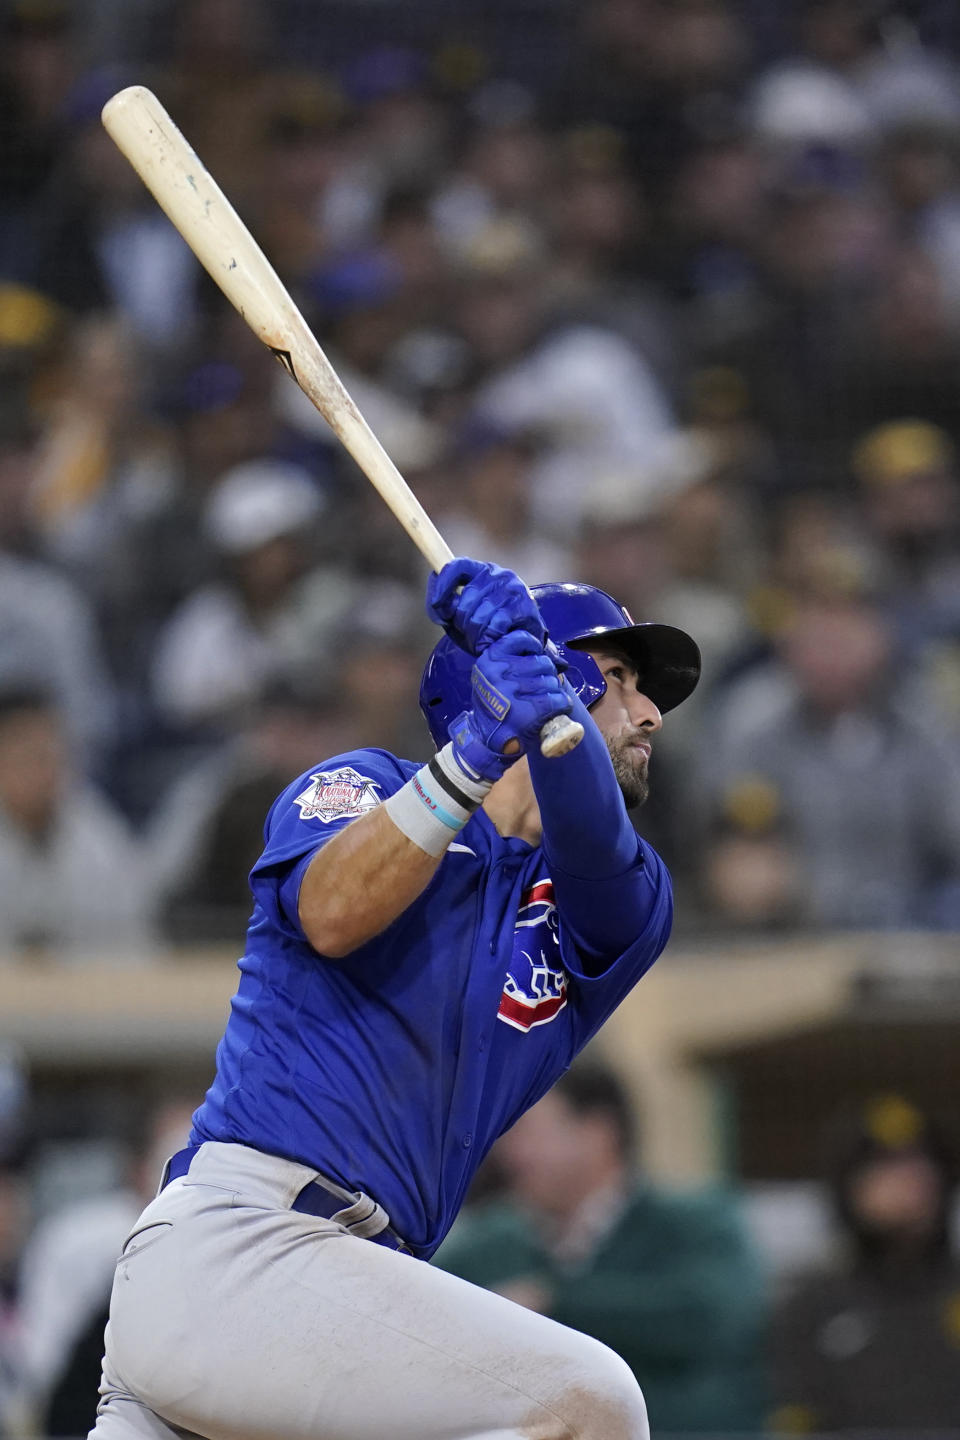 Chicago Cubs' Alfonso Rivas watches his two-run home run during the third inning of a baseball game against the San Diego Padres, Tuesday, May 10, 2022, in San Diego. (AP Photo/Gregory Bull)